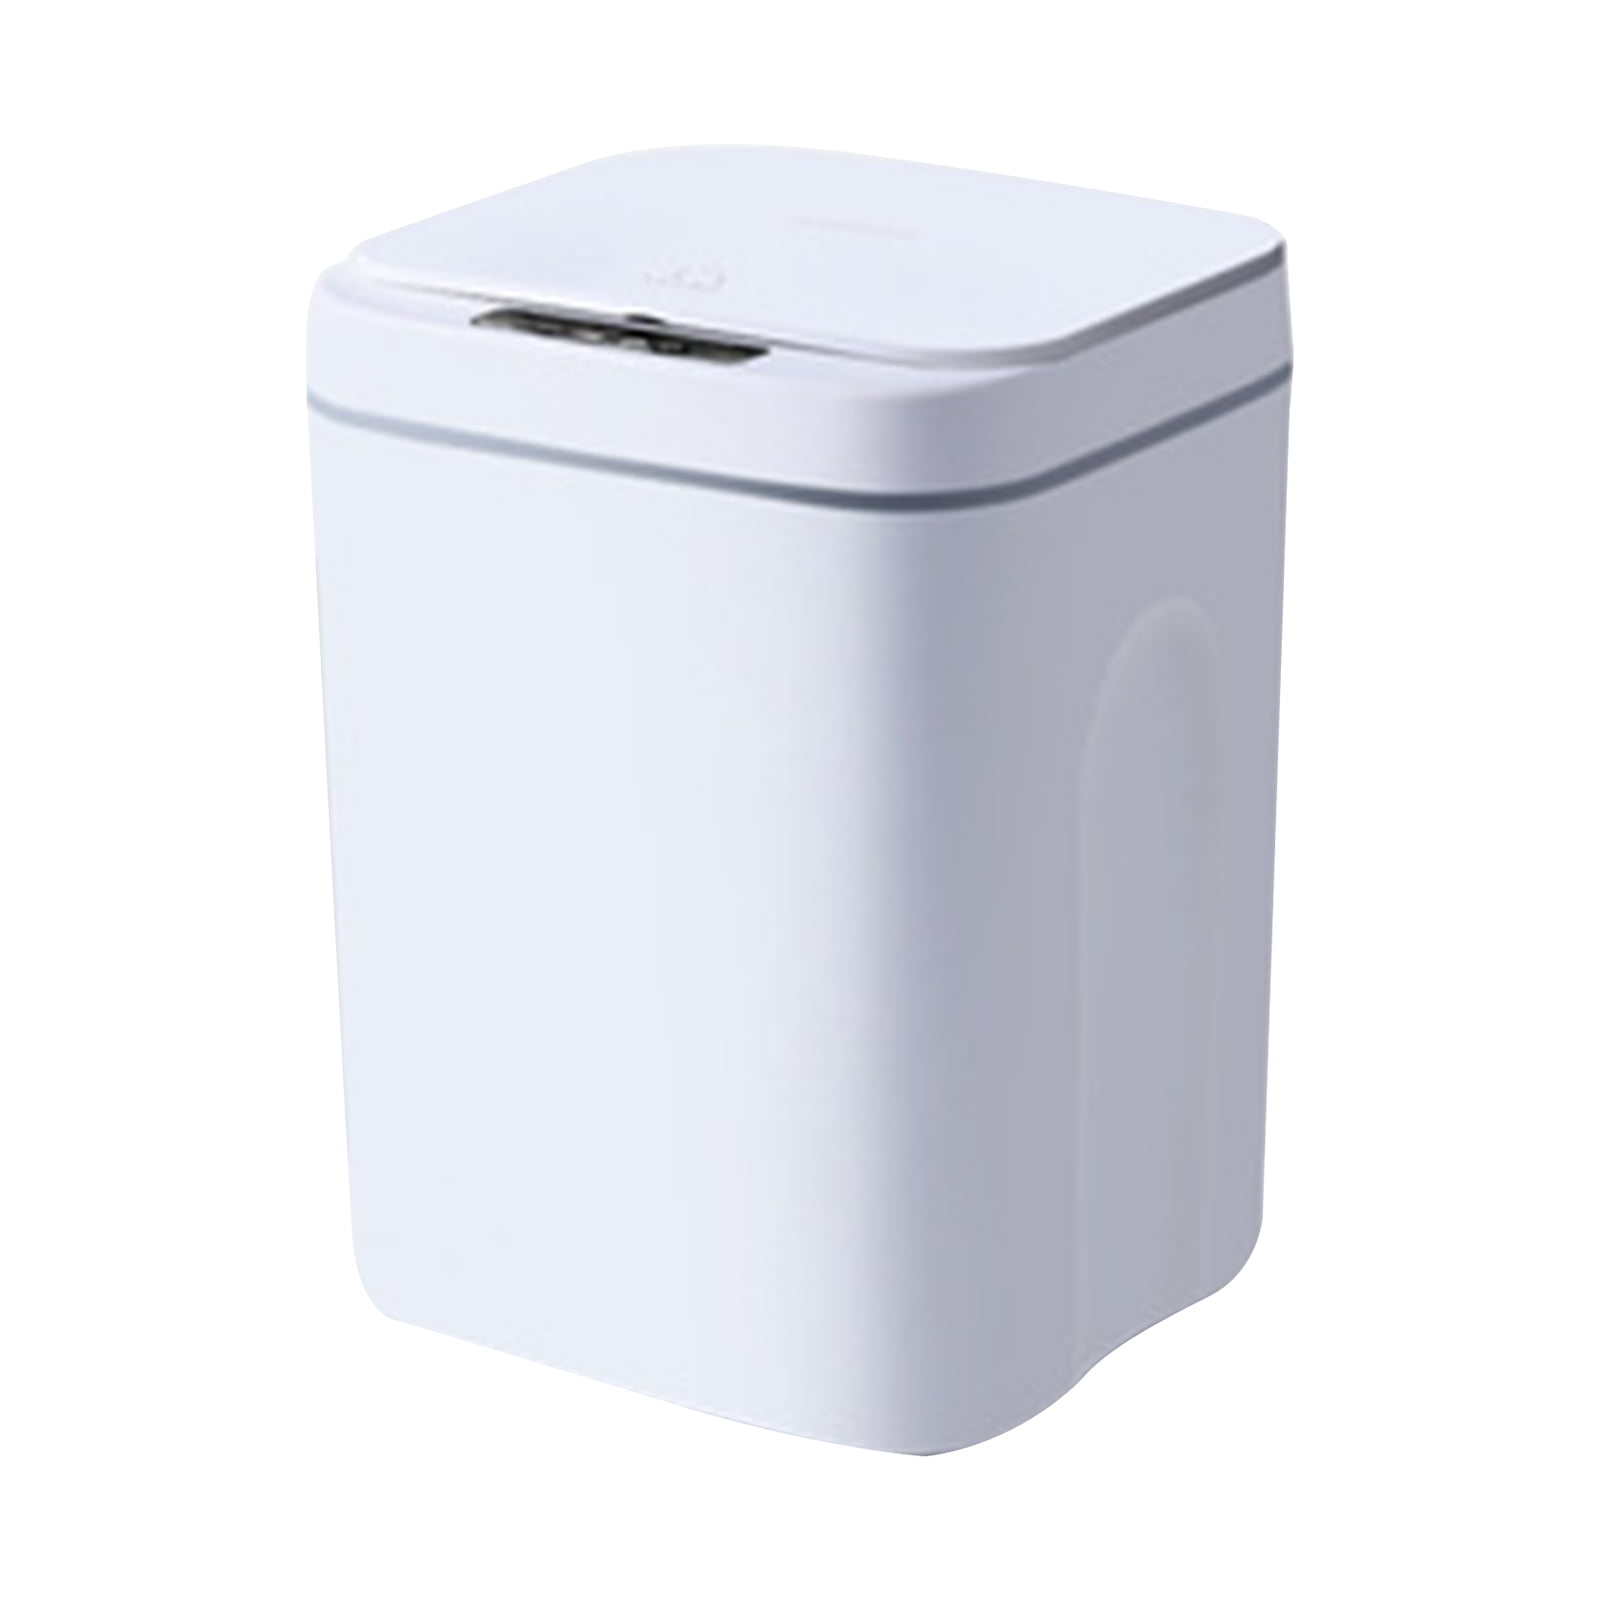 Details about   Large Automatic Touchless Bin Smart Induction Trash Can Kitchen Bathroo 